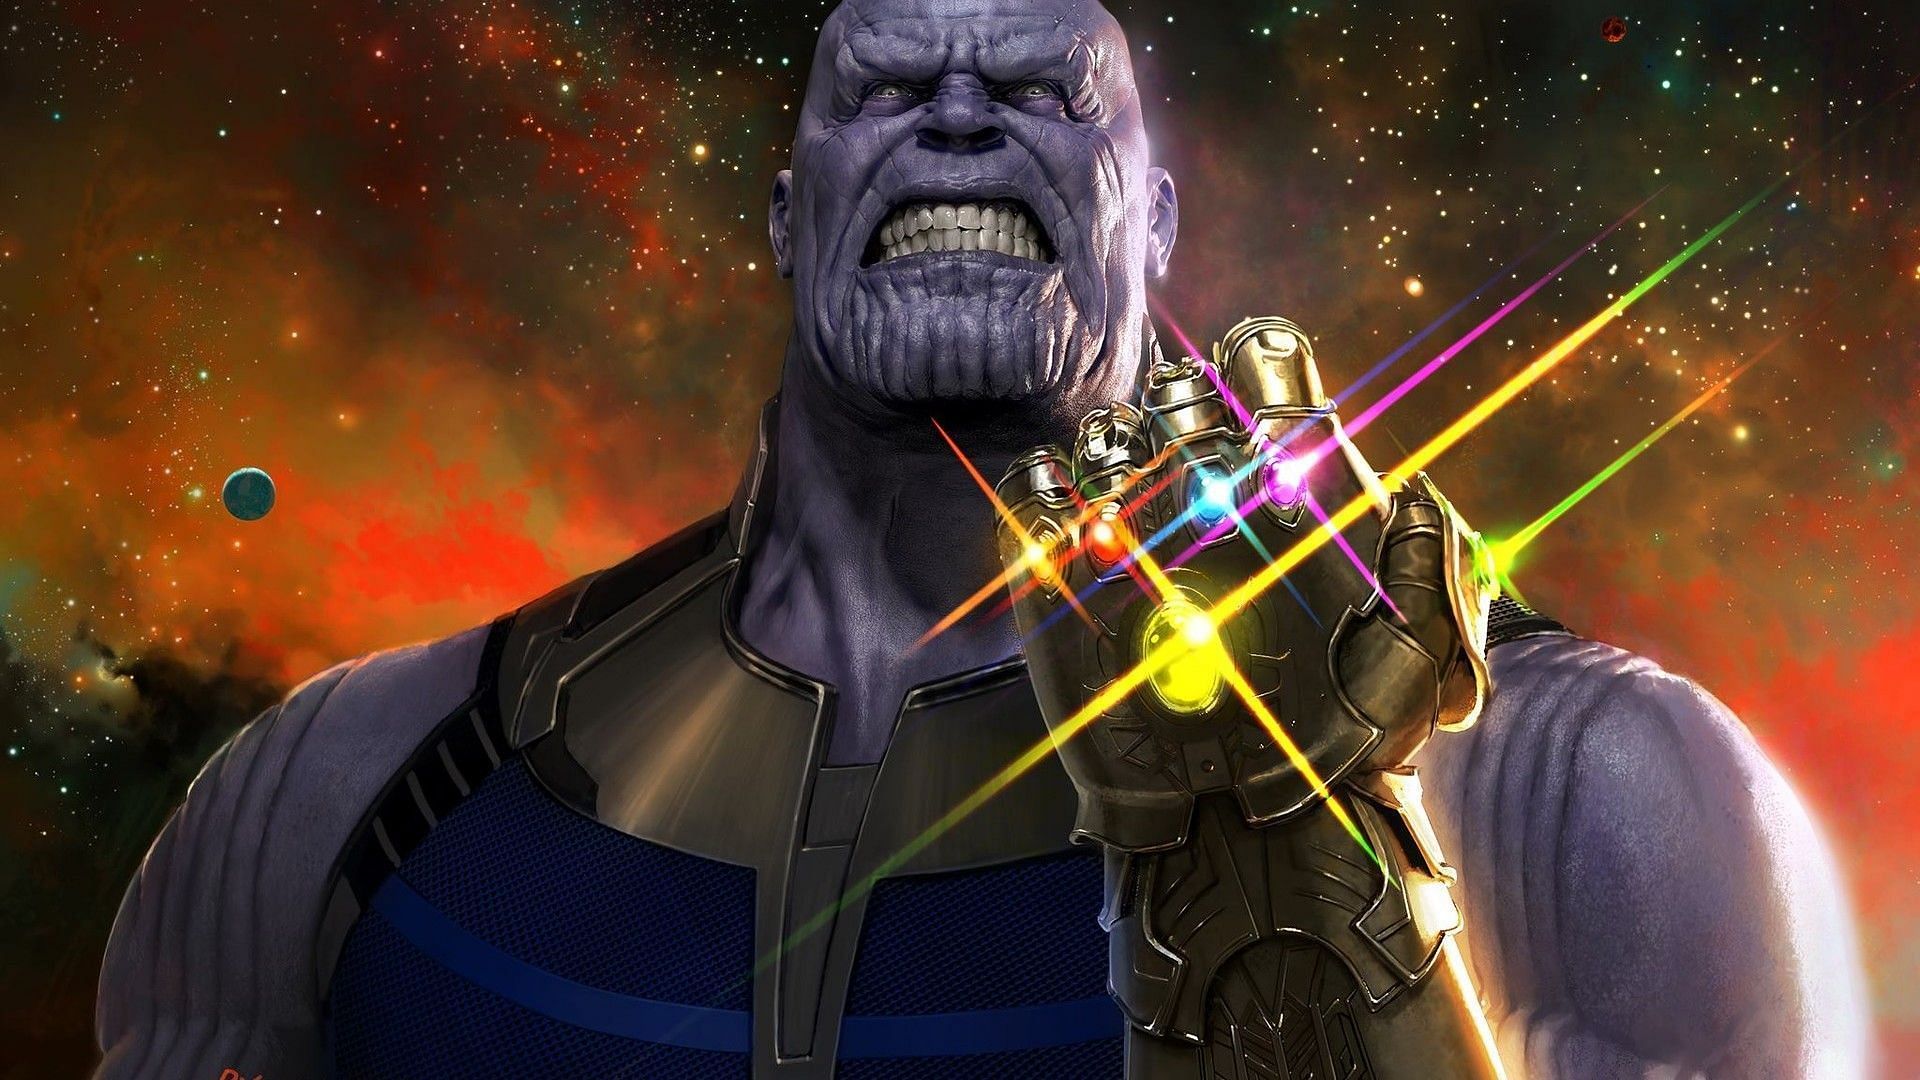 Thanos was the ultimate villain in the Avengers series (Image via Marvel Studios)